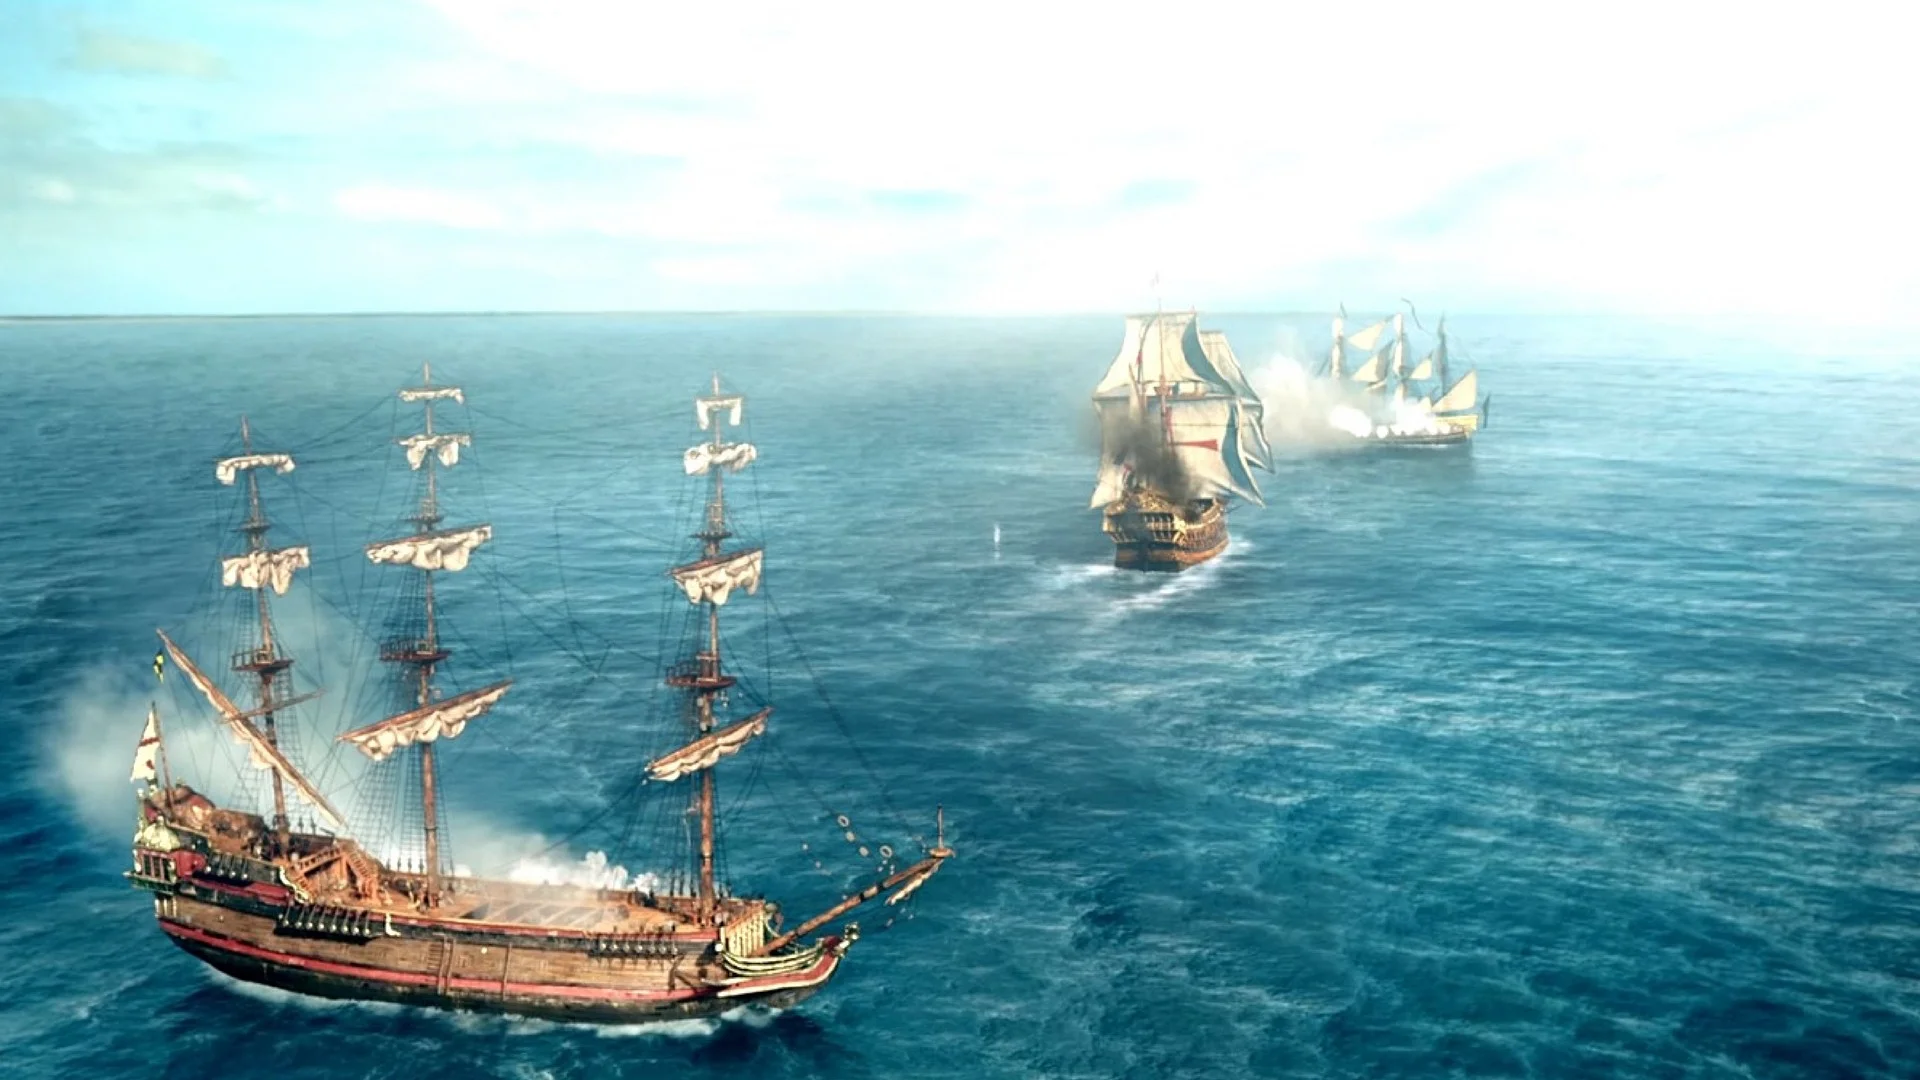 ships in black sails season 4 produced by micheal bay